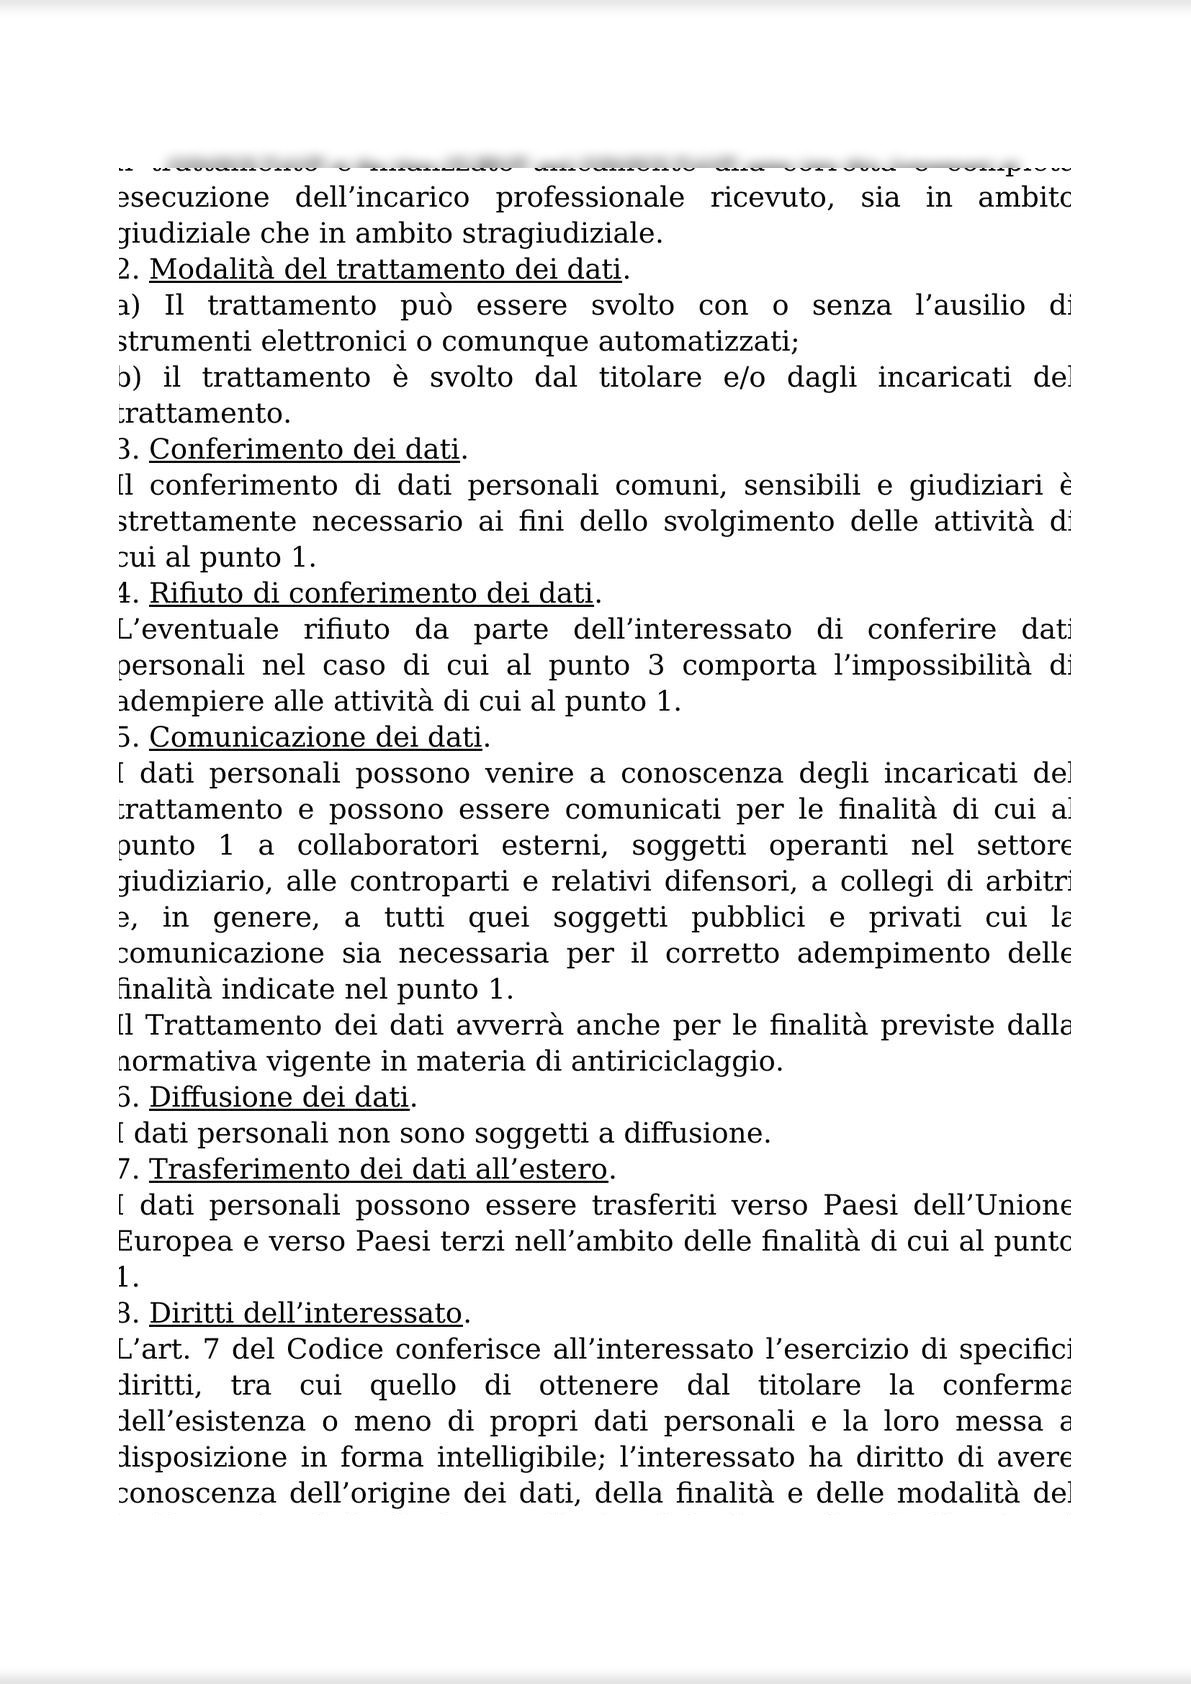 INTELLECTUAL WORK AGREEMENT FOR OUT-OF-COURT ACTIVITIES AND ATTACHMENTS 1 (PRIVACY); 2 (ANTI-MONEY LAUNDERING); AND 3 FEE QUOTE / CONTRATTO D’OPERA INTELLETTUALE STRAGIUDIZIALE-7